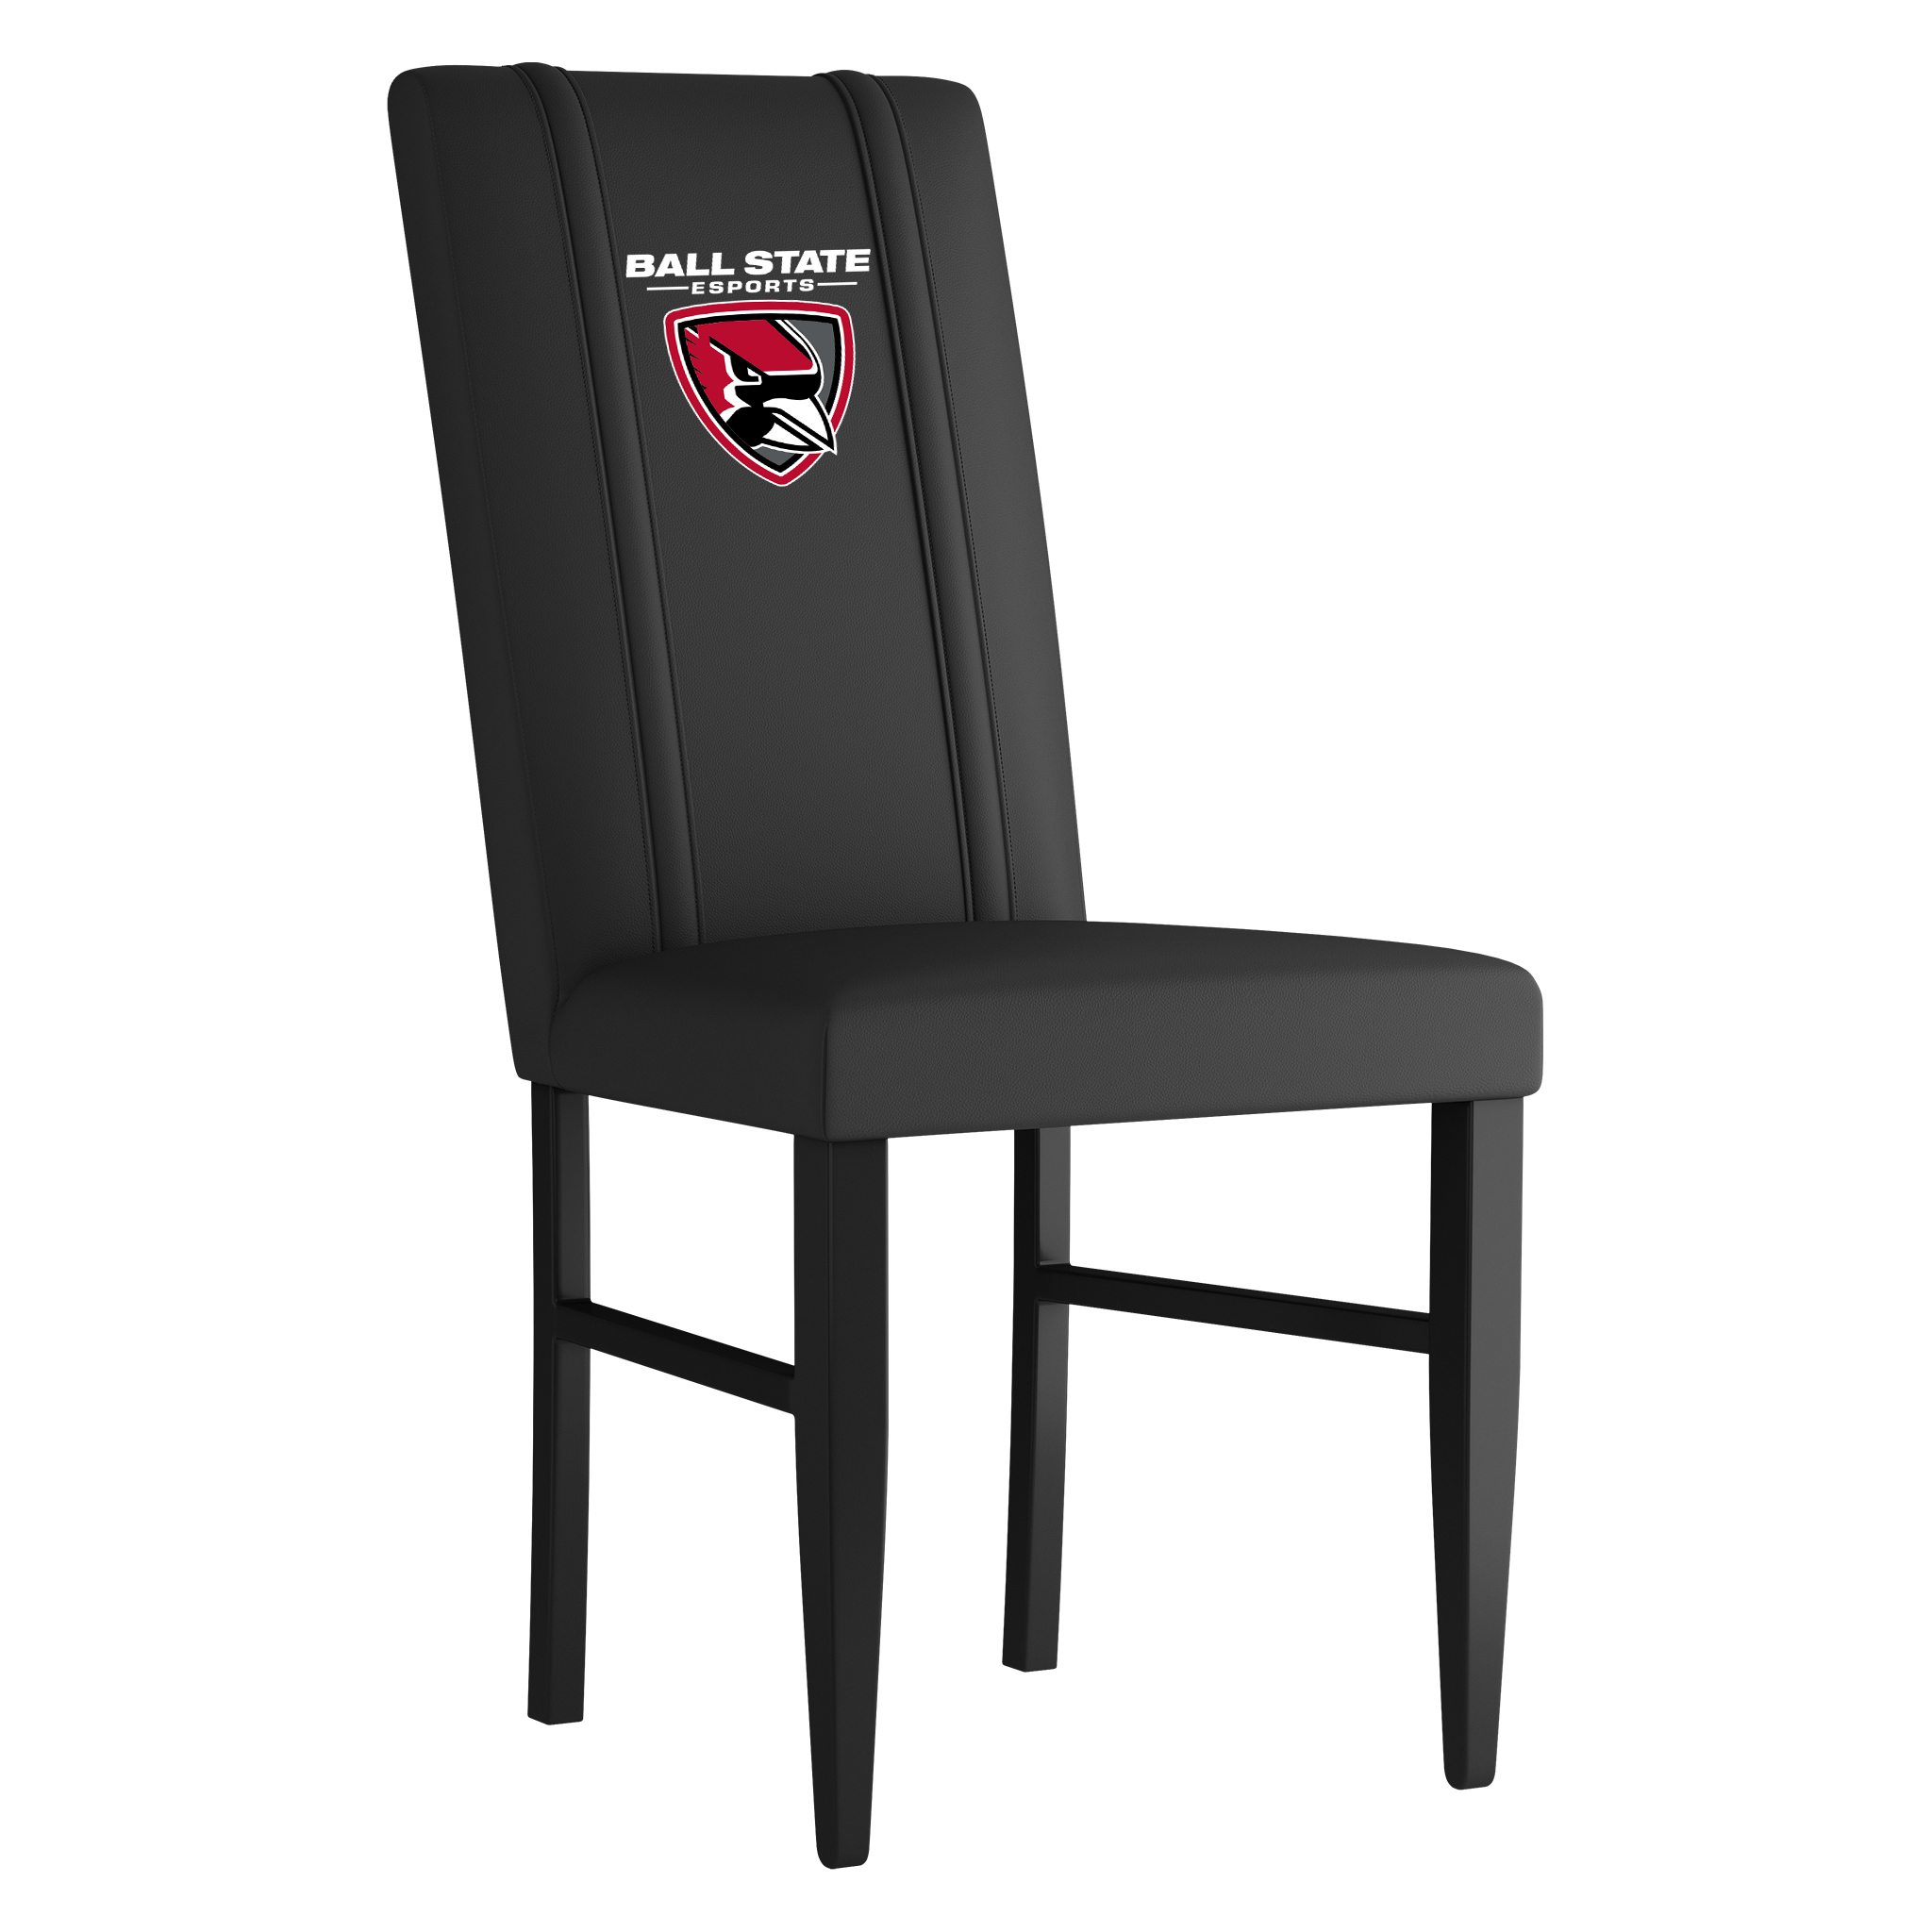 Ball State University Side Chair 2000 With Ball State Esports